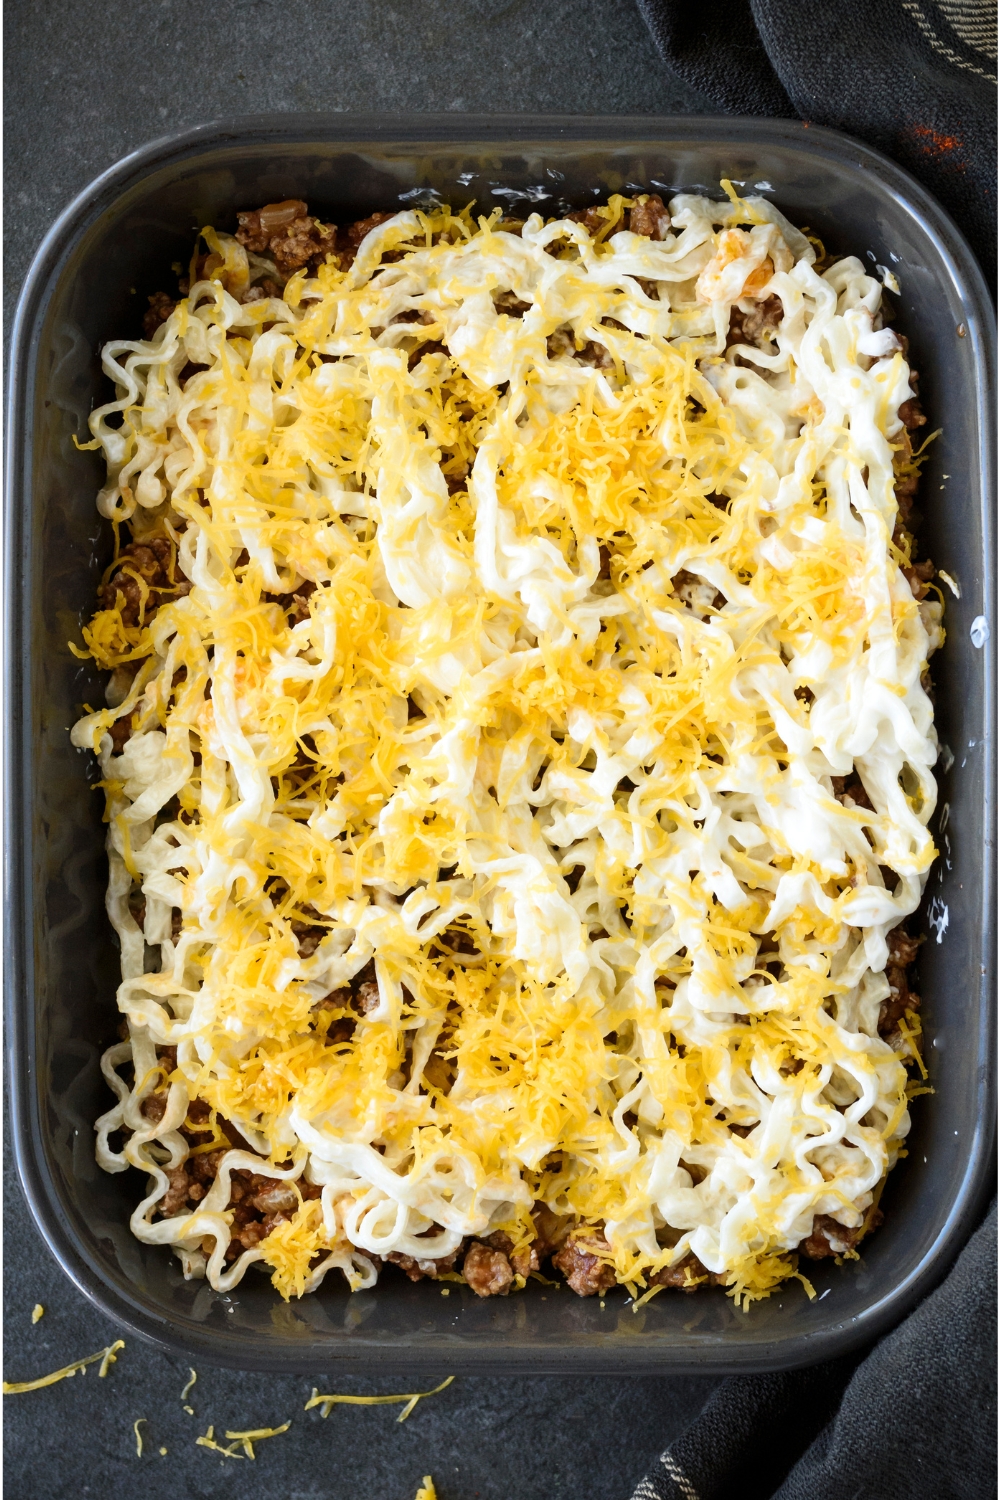 A baking dish filled with layers of cooked ground beef, cooked noodles in cream sauce, and shredded cheese on top.